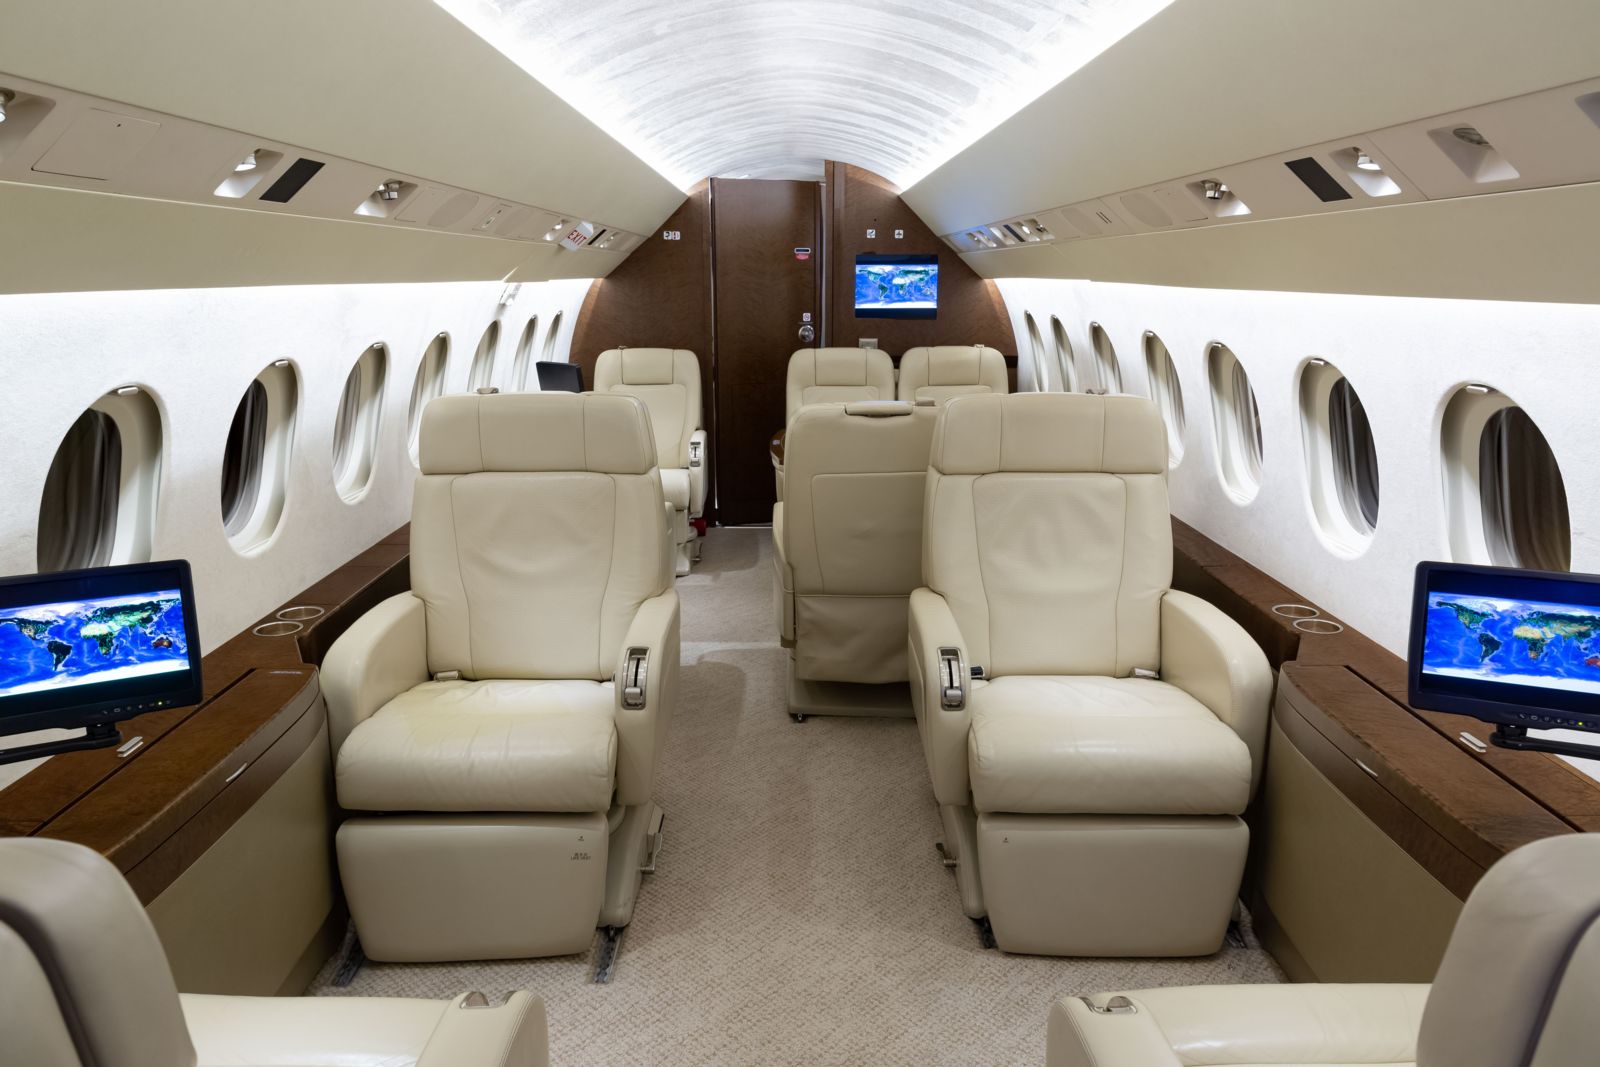 Dassault Falcon 2000LX  S/N 186 for sale | gallery image: /userfiles/files/specs/F2000LX/int%20face%20aft.jpeg